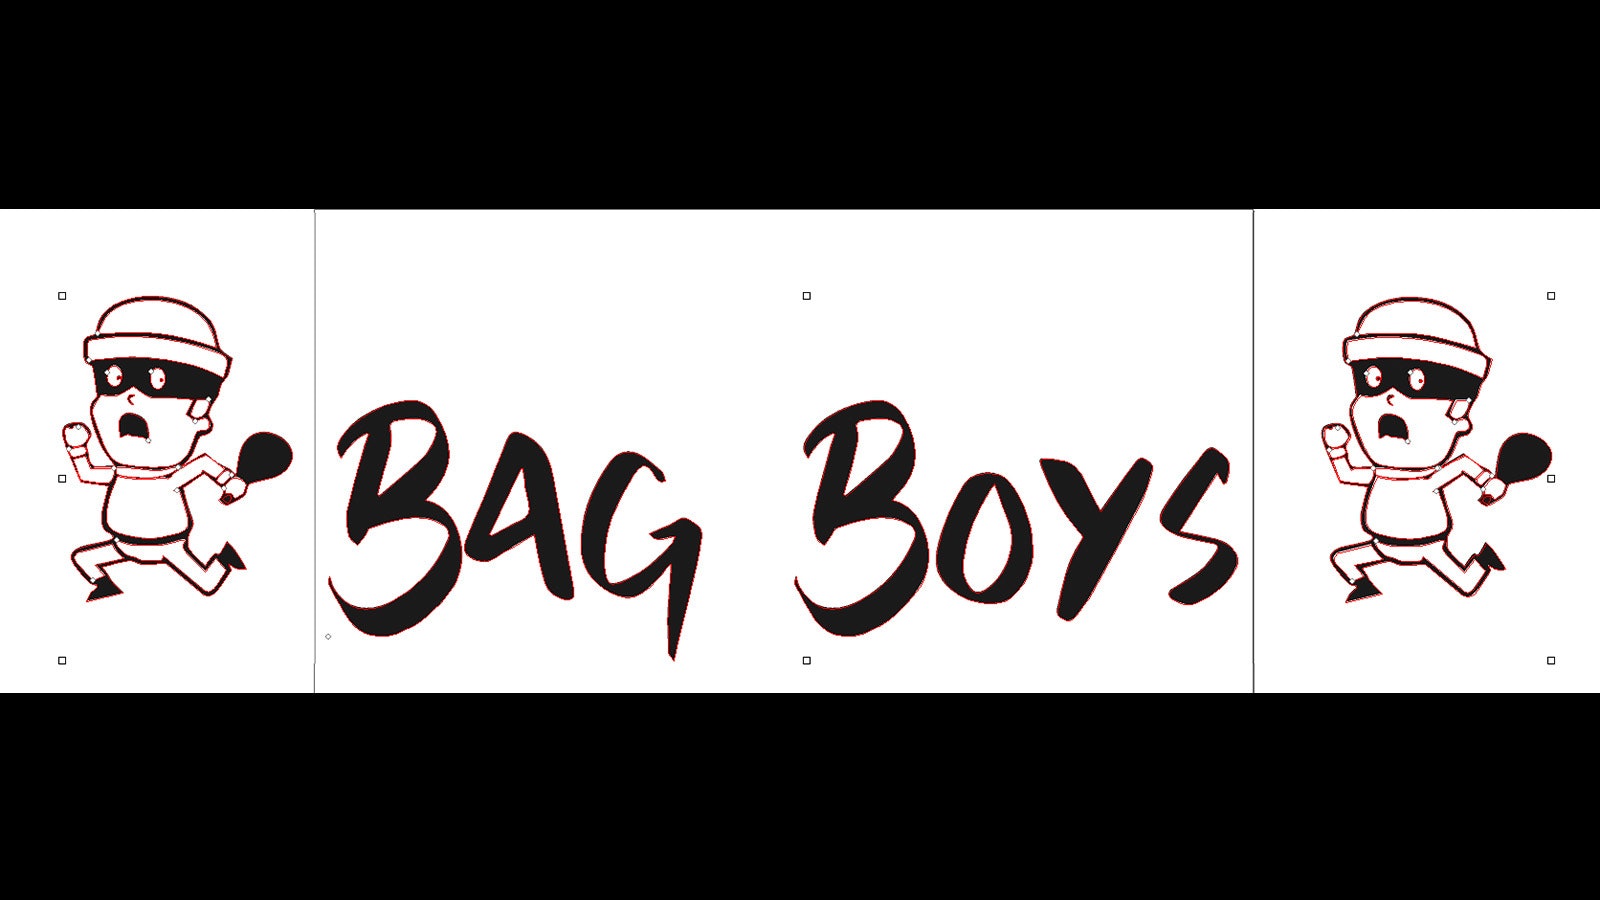 Hillcrest Elementary School in Gillette came up with the name Bag Boys for a city garbage truck.